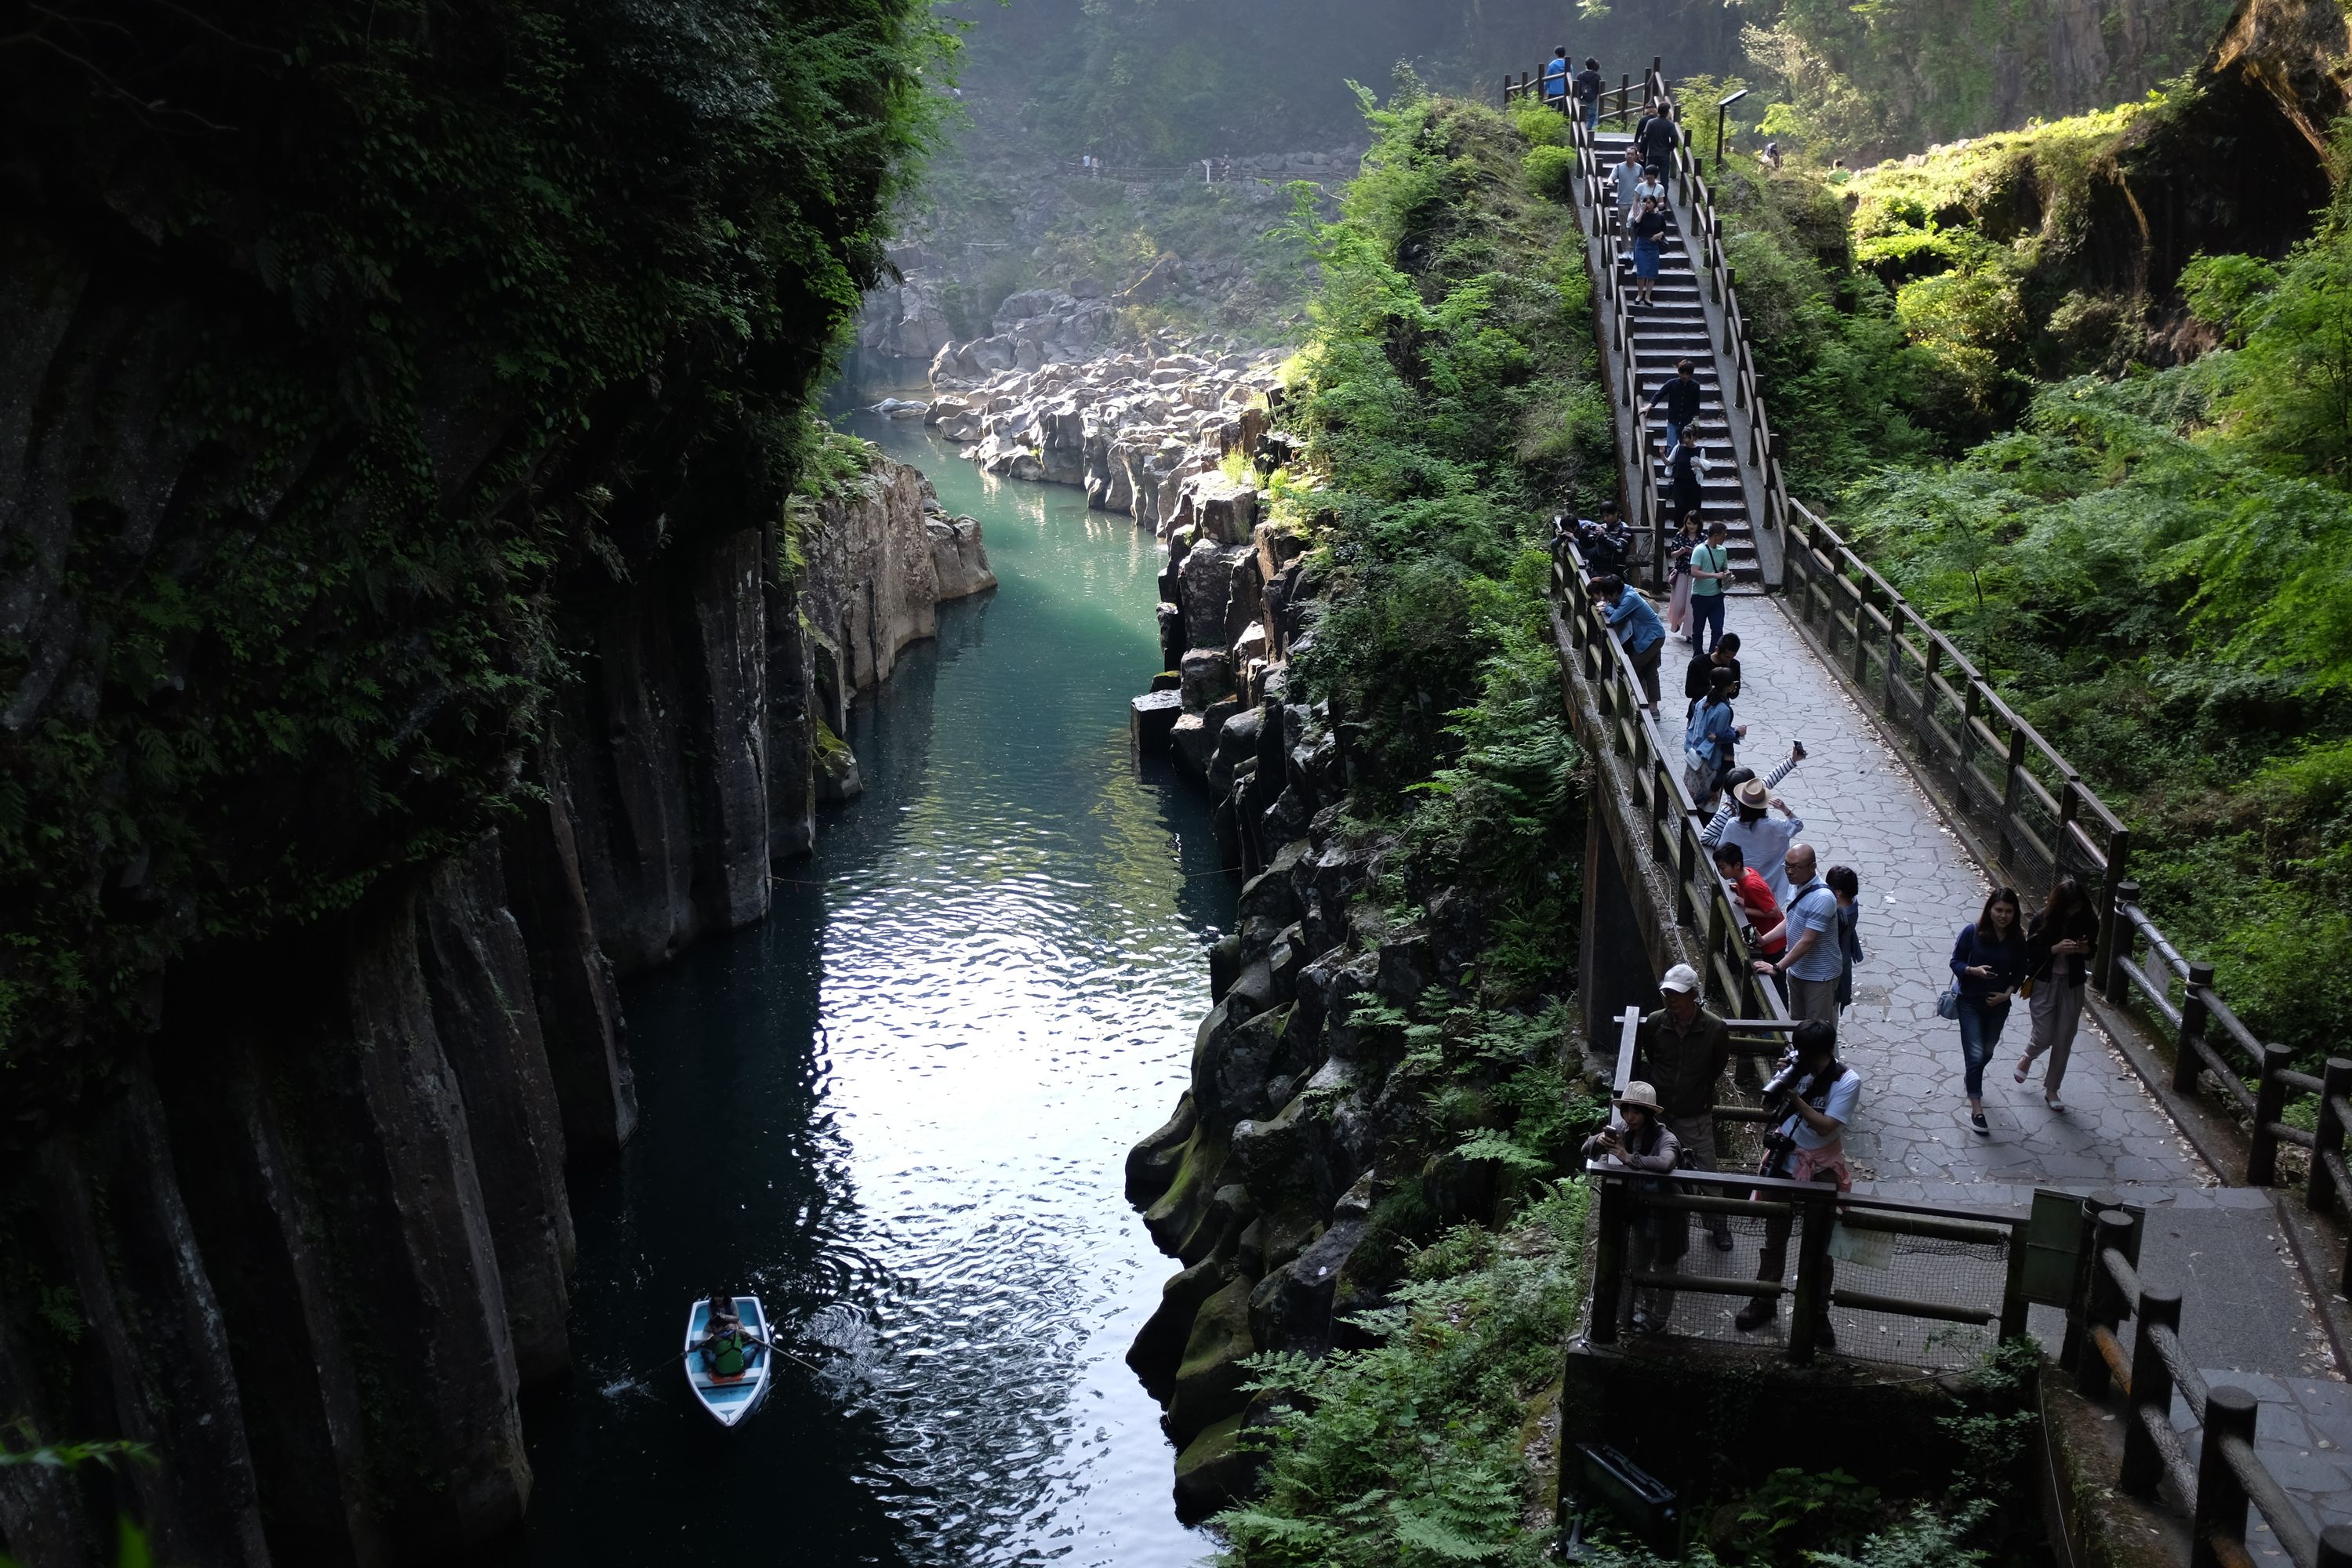 A lot of people on a walkway by a stream flowing through a gorge whose walls are black columns of basalt.